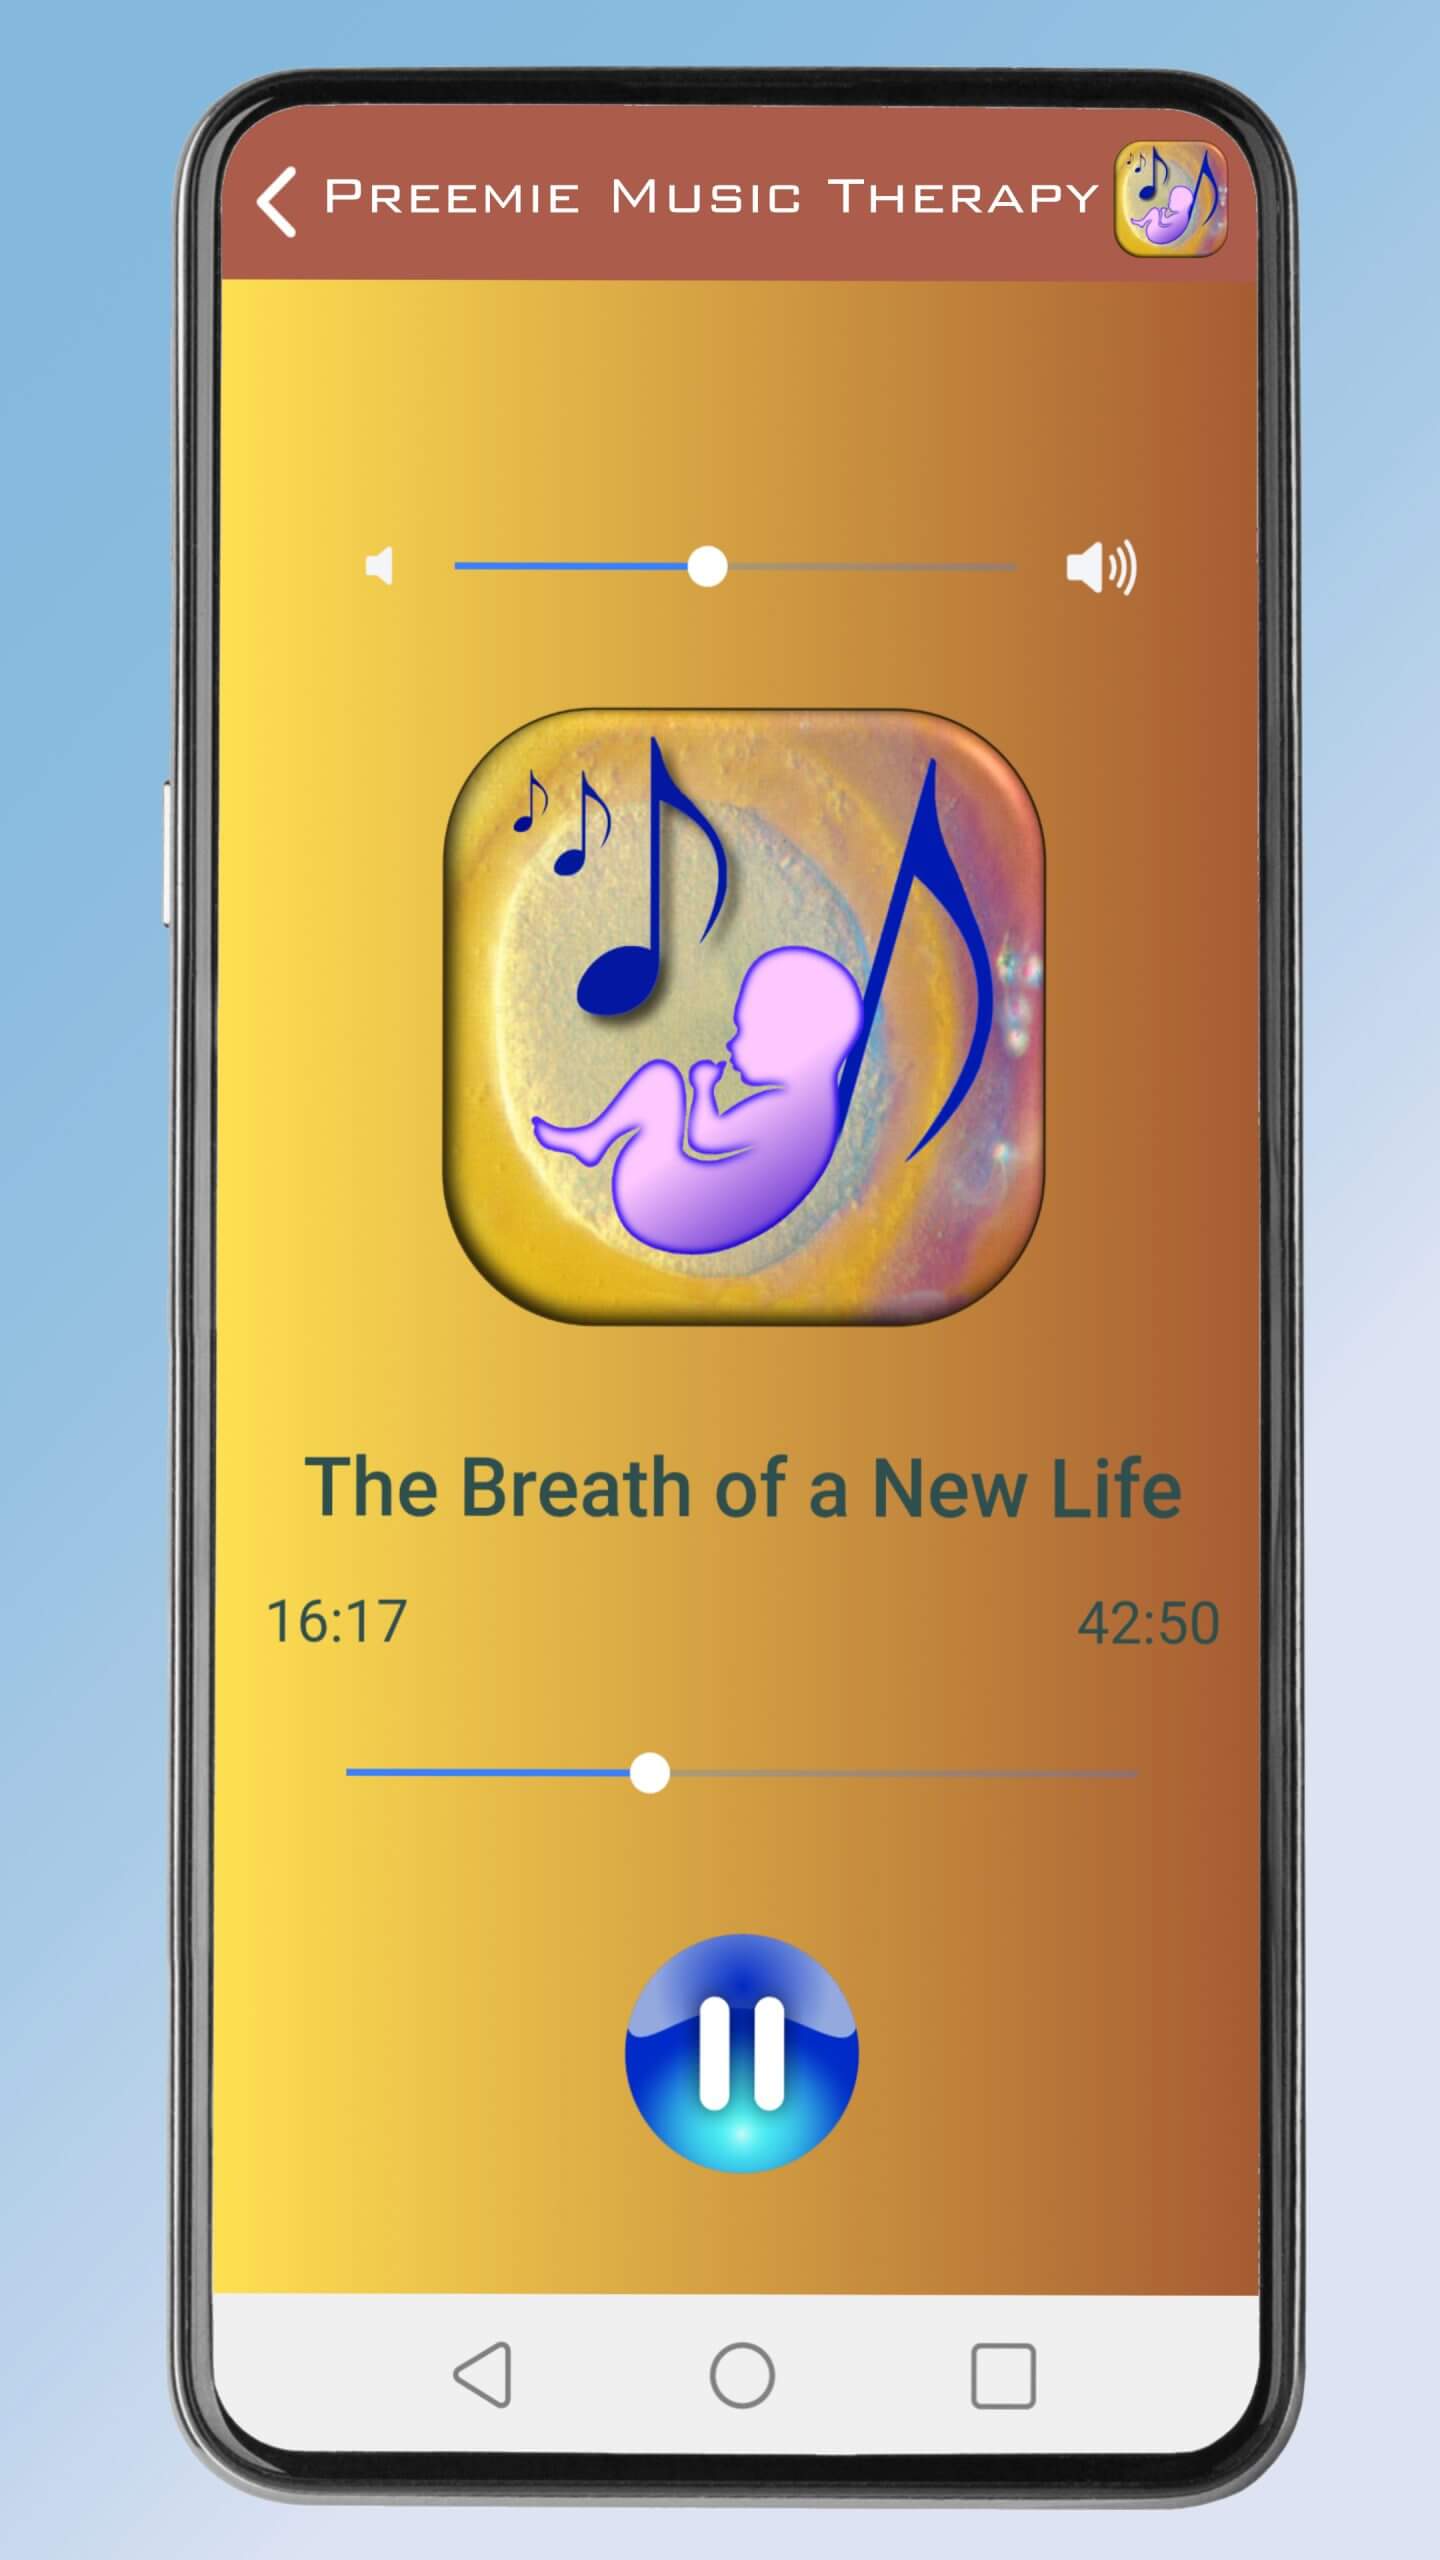 Music therapy app for premature babies, suitable to use at the hospital and at home.